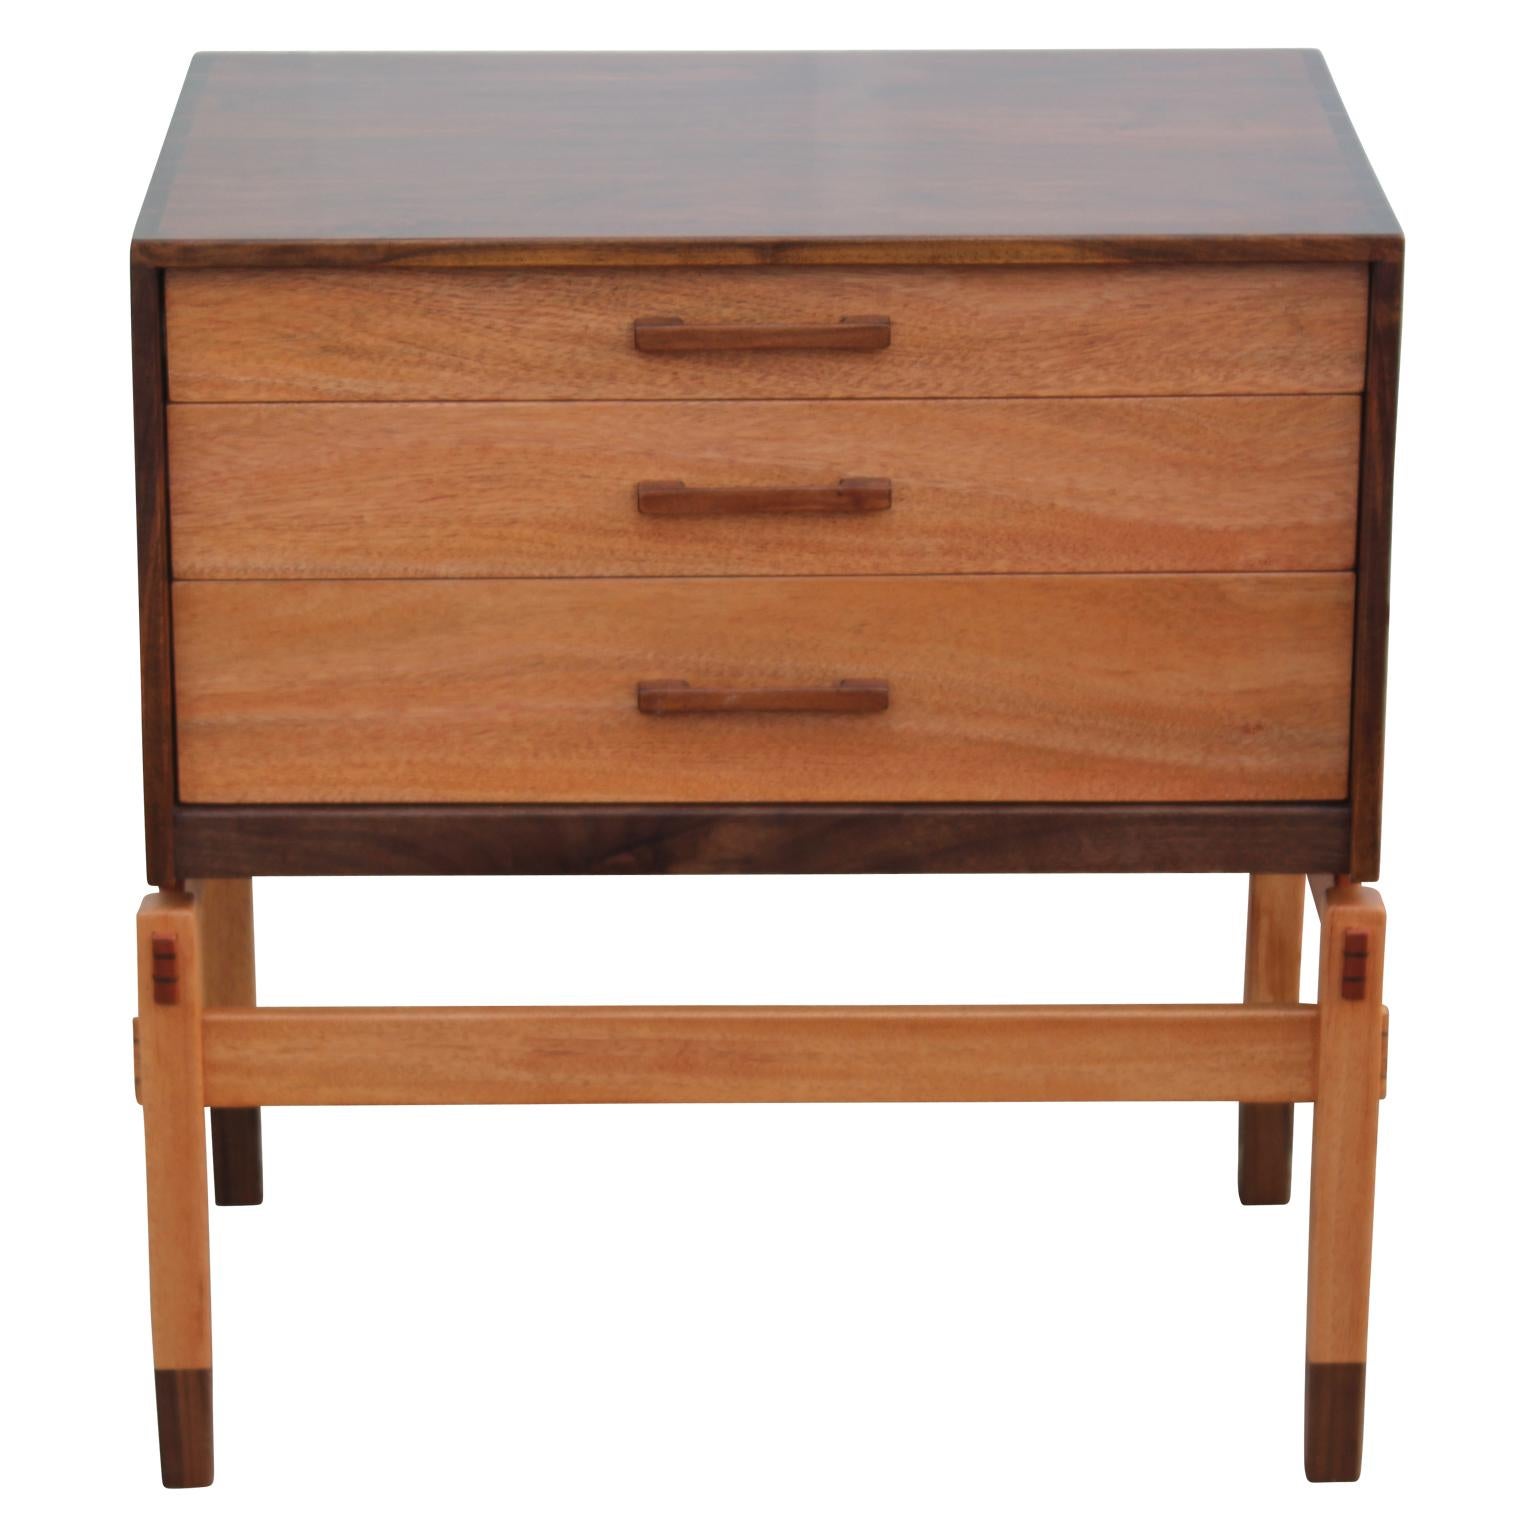 Gorgeous tongue and groove two tone Danish style nightstand or small chest with three drawers made from gorgeous walnut with wonderful detailing.